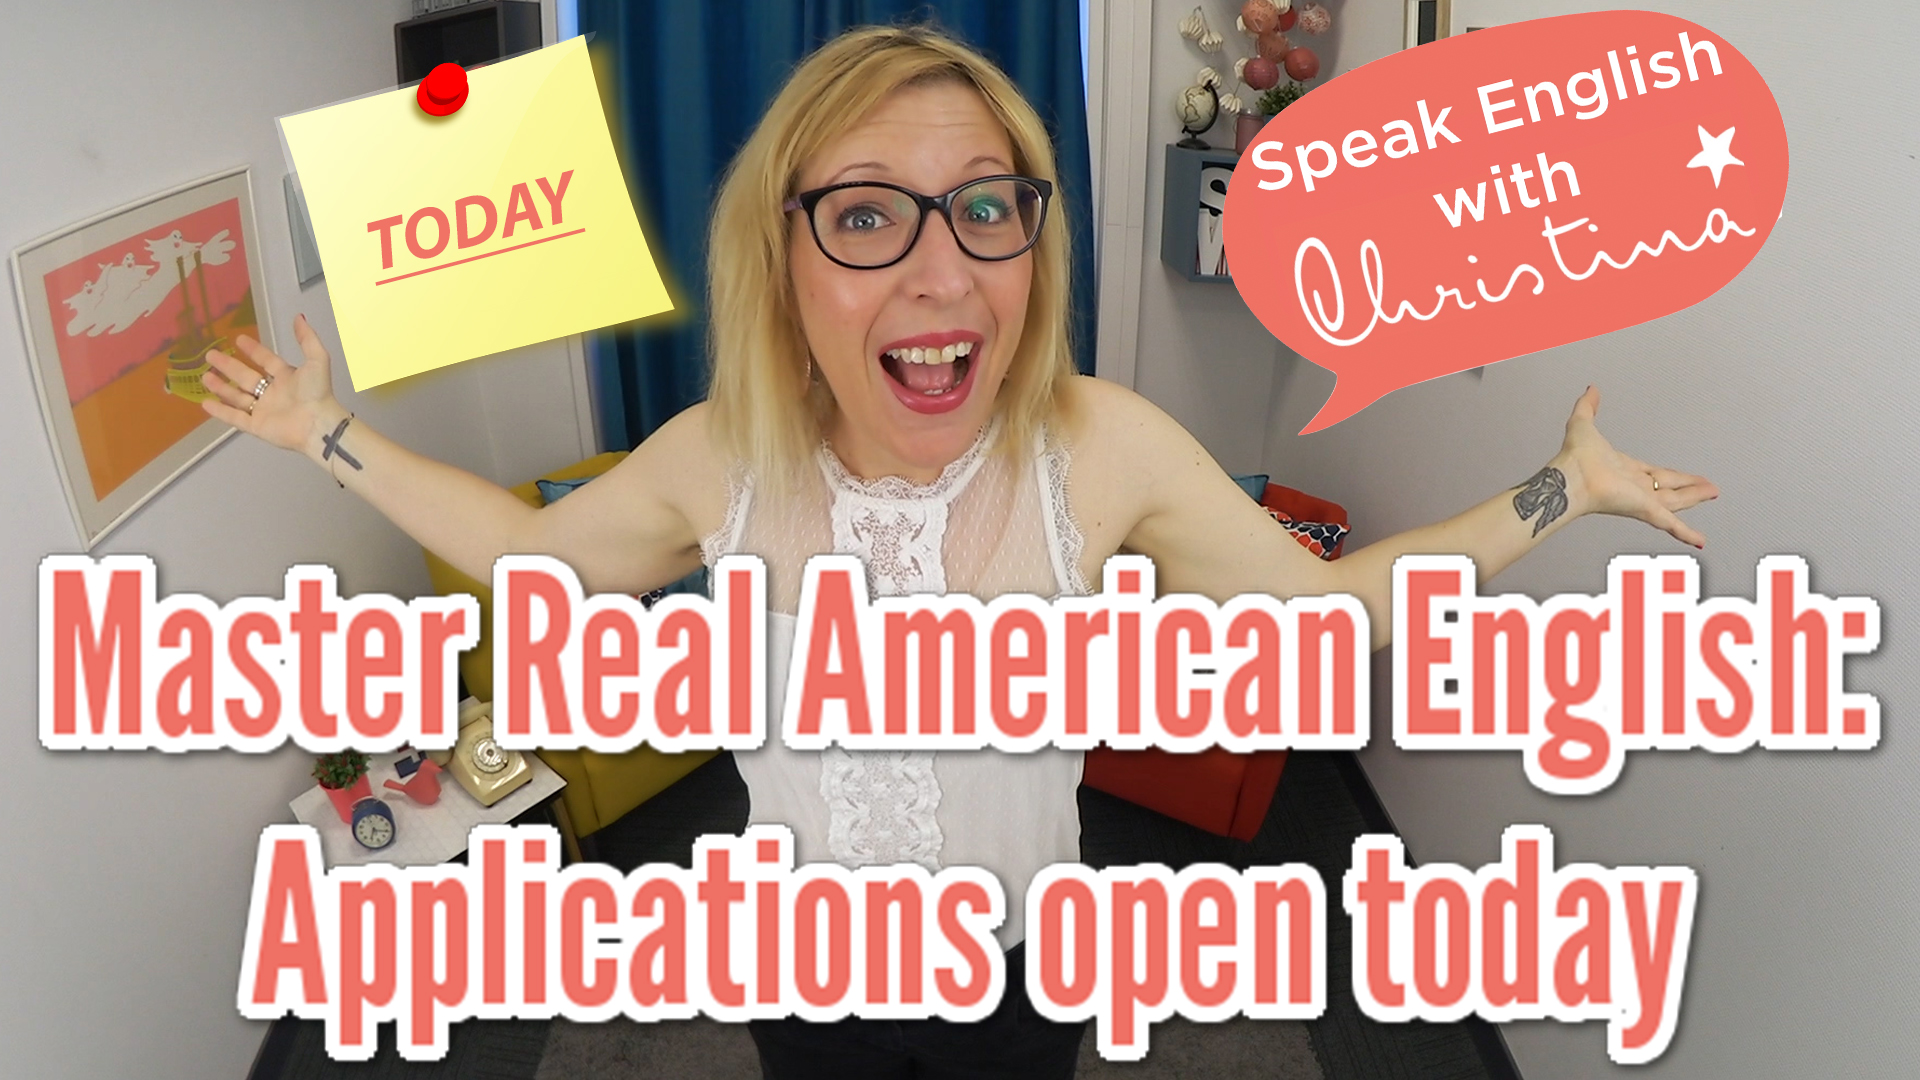 applications for master real american English open